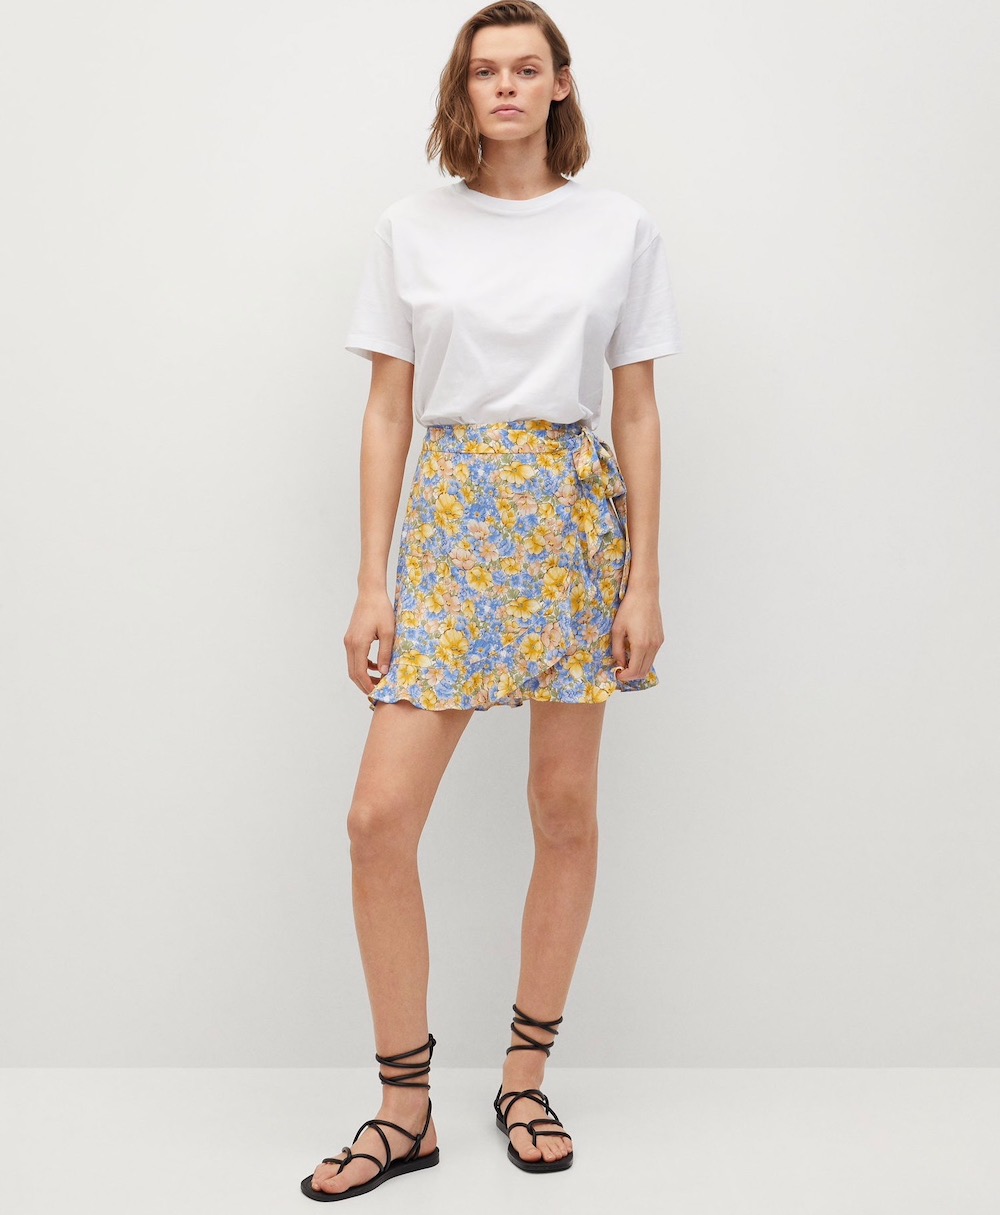 Miniskirts for Spring and Summer - theFashionSpot